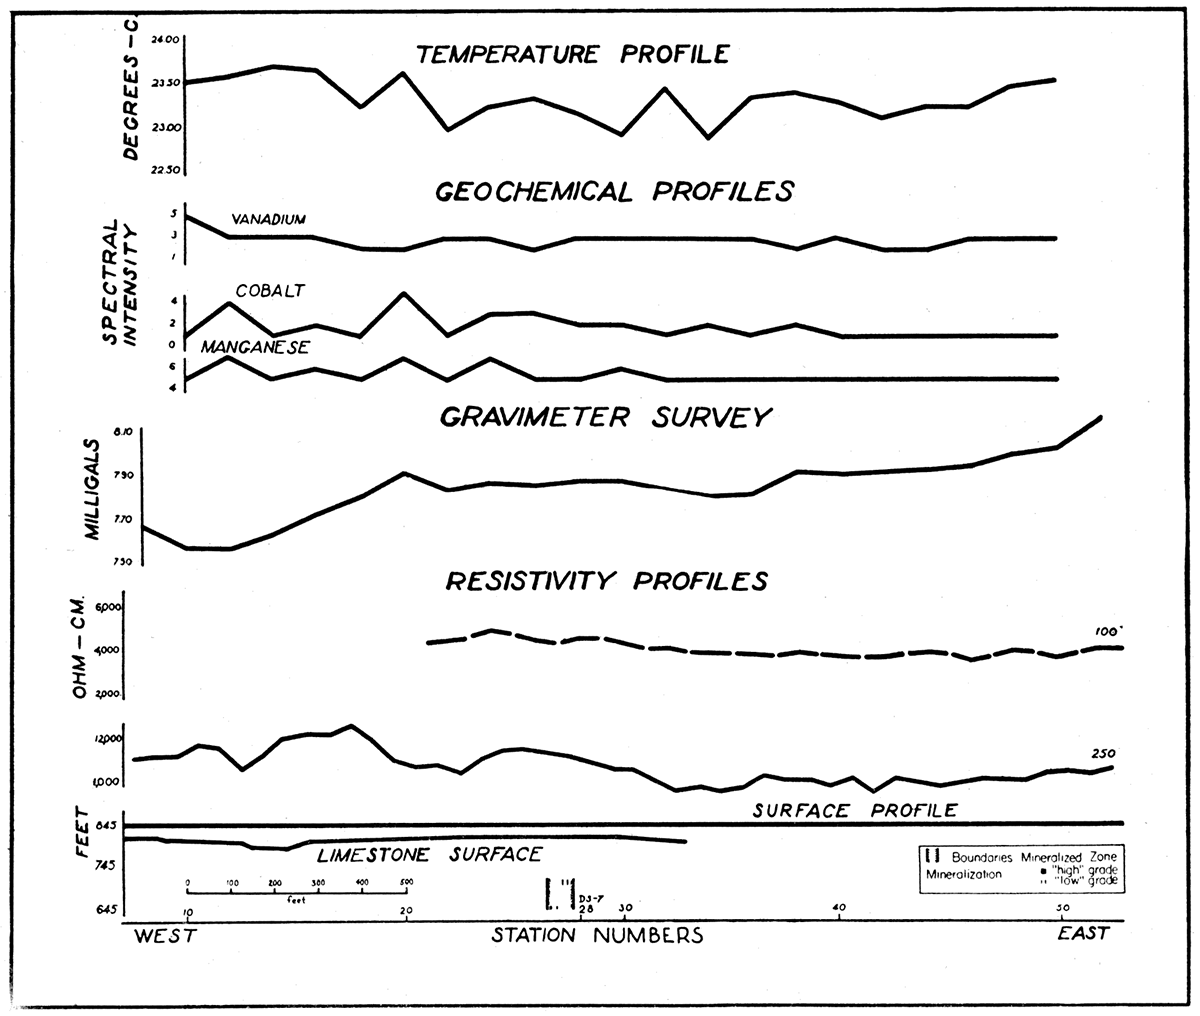 Profiles along traverse IV-IV' in the Greenback area, showing gravity, resistivity, geothermal, and geochemical anomalies, zone of mineralization, and configuration of the top of the limestone.